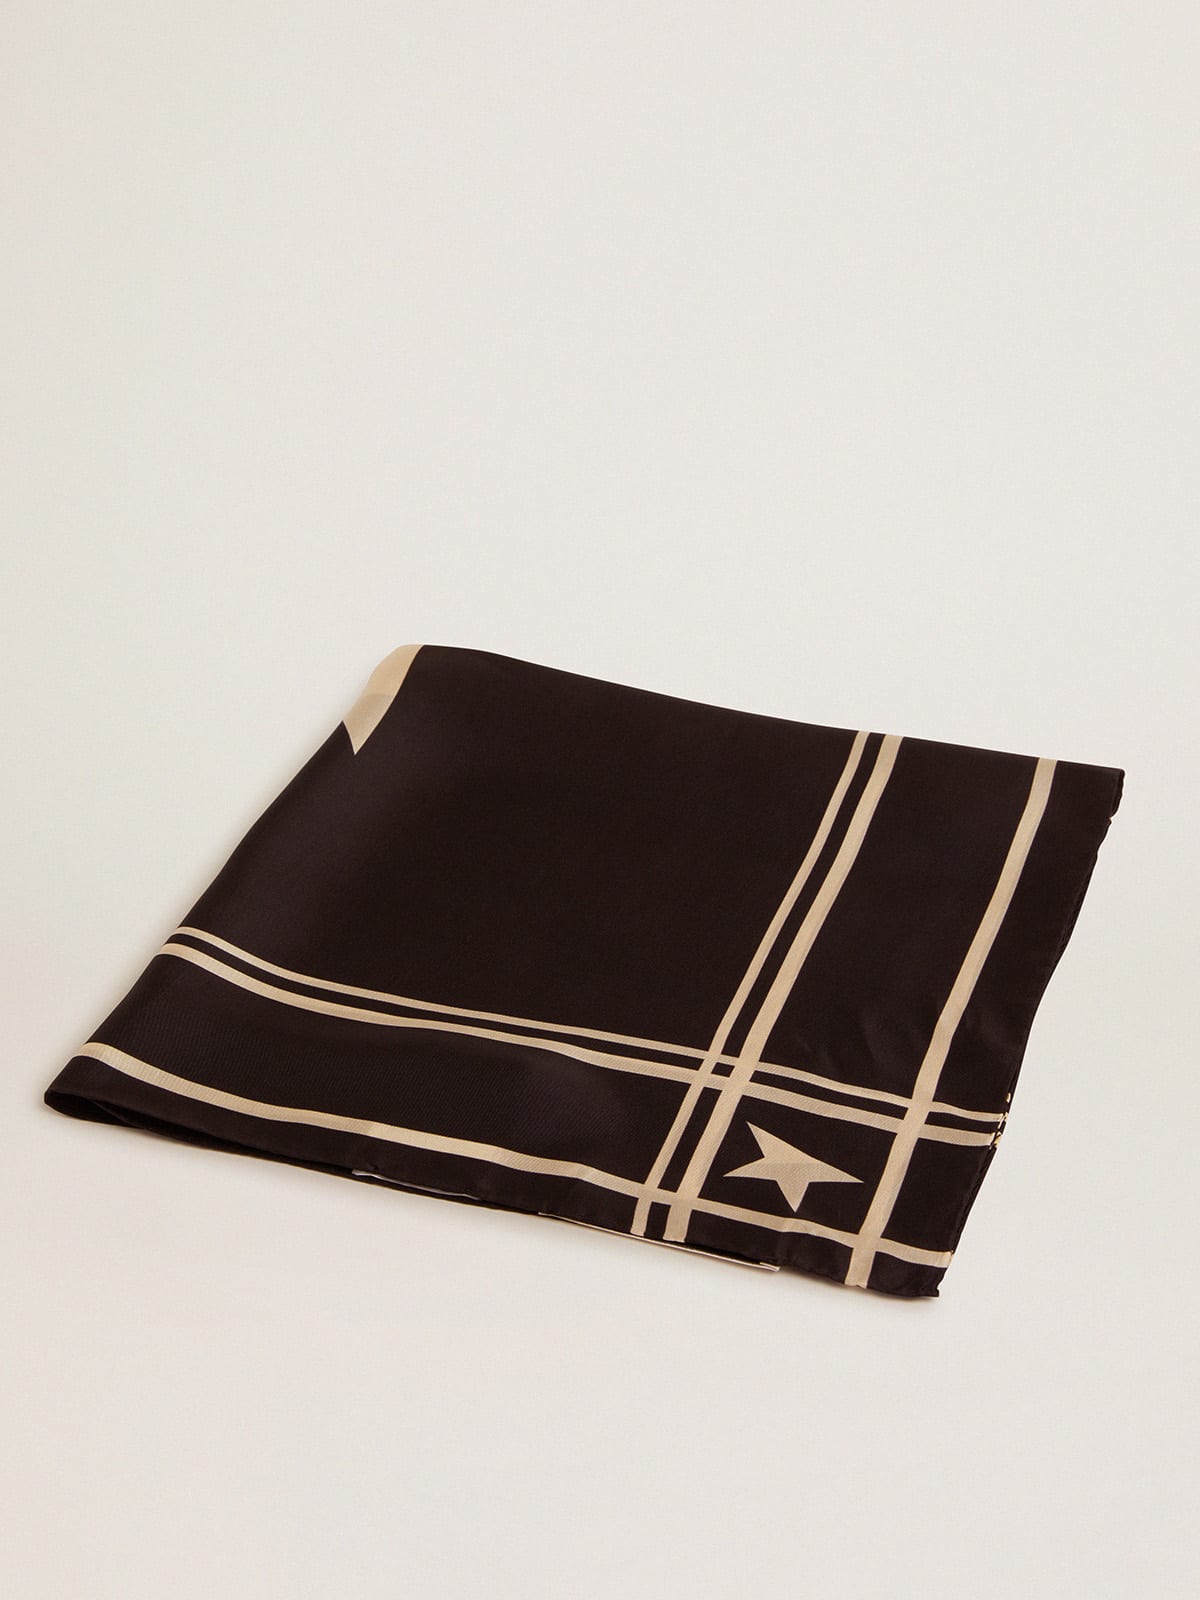 Golden Goose - Black foulard with contrasting white stripes and stars in 